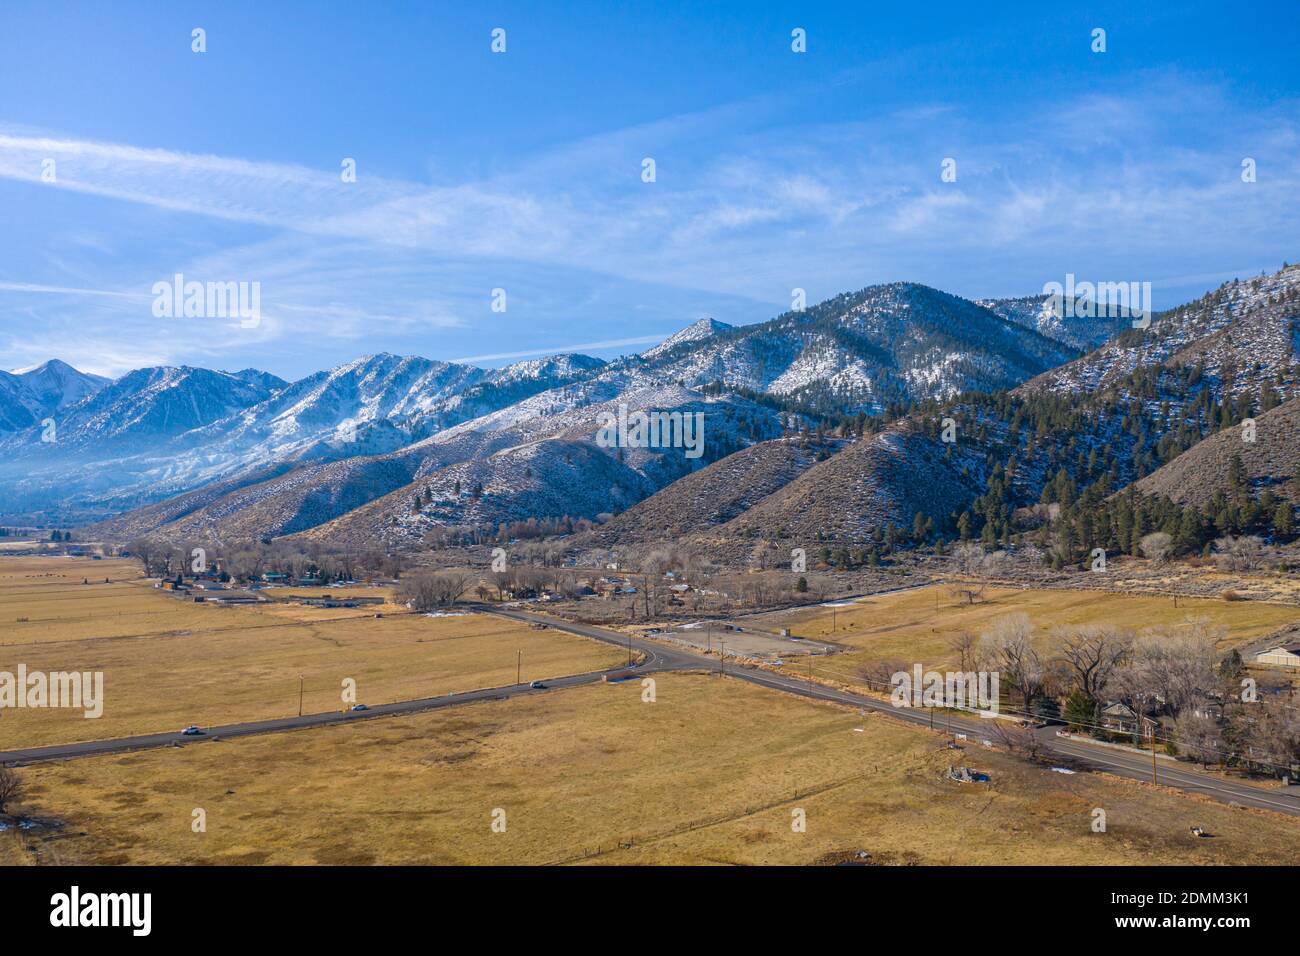 GENOA, NEVADA, UNITED STATES - Dec 15, 2020: A rural intersection in the town of Genoa, Nevada, beneath the snow-capped peaks of the Sierra Nevada mou Stock Photo